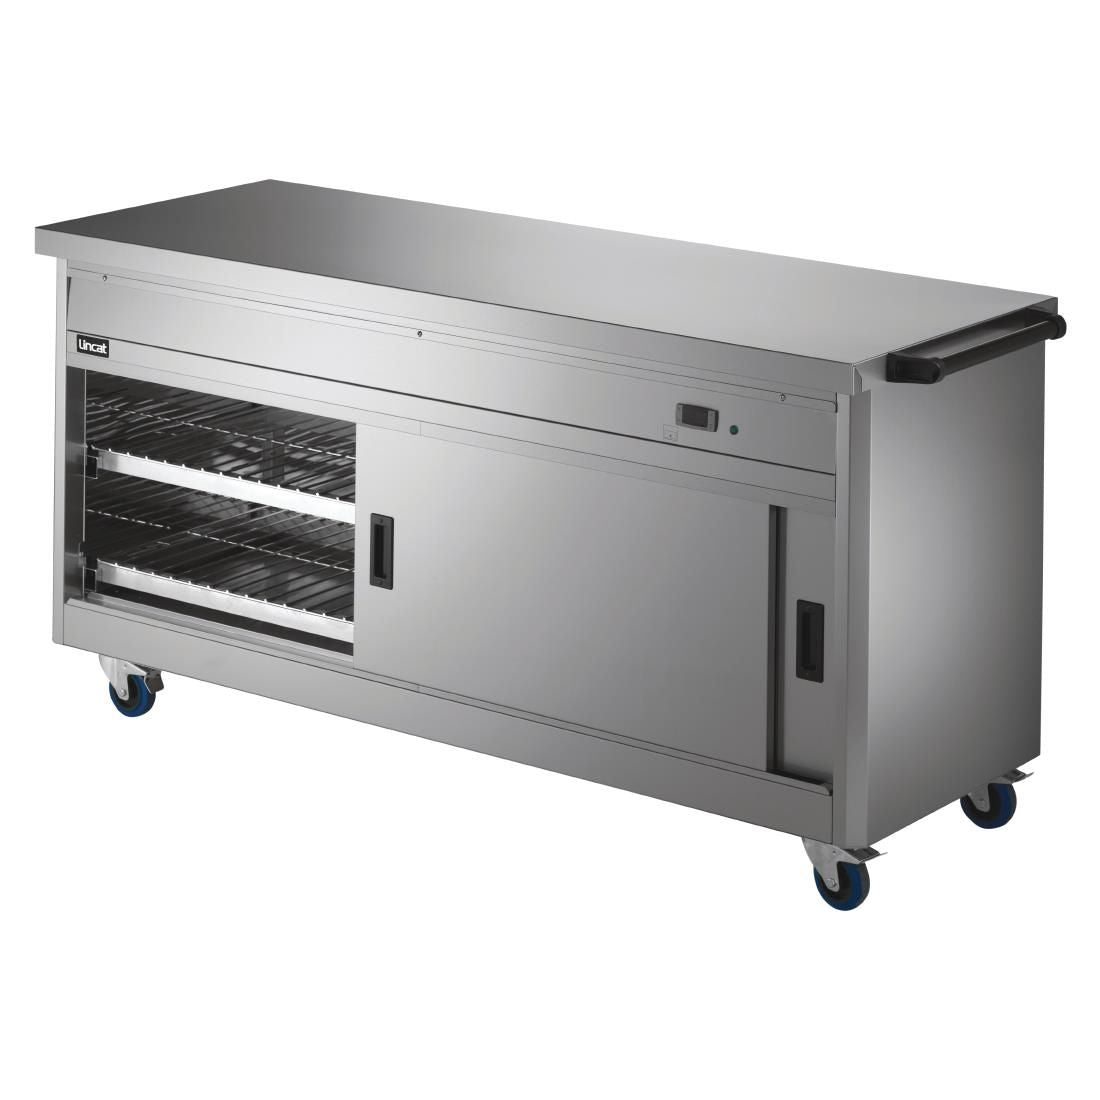 GJ573 Lincat Panther 670 Series Hot Cupboard with Plain tops P6P5 JD Catering Equipment Solutions Ltd